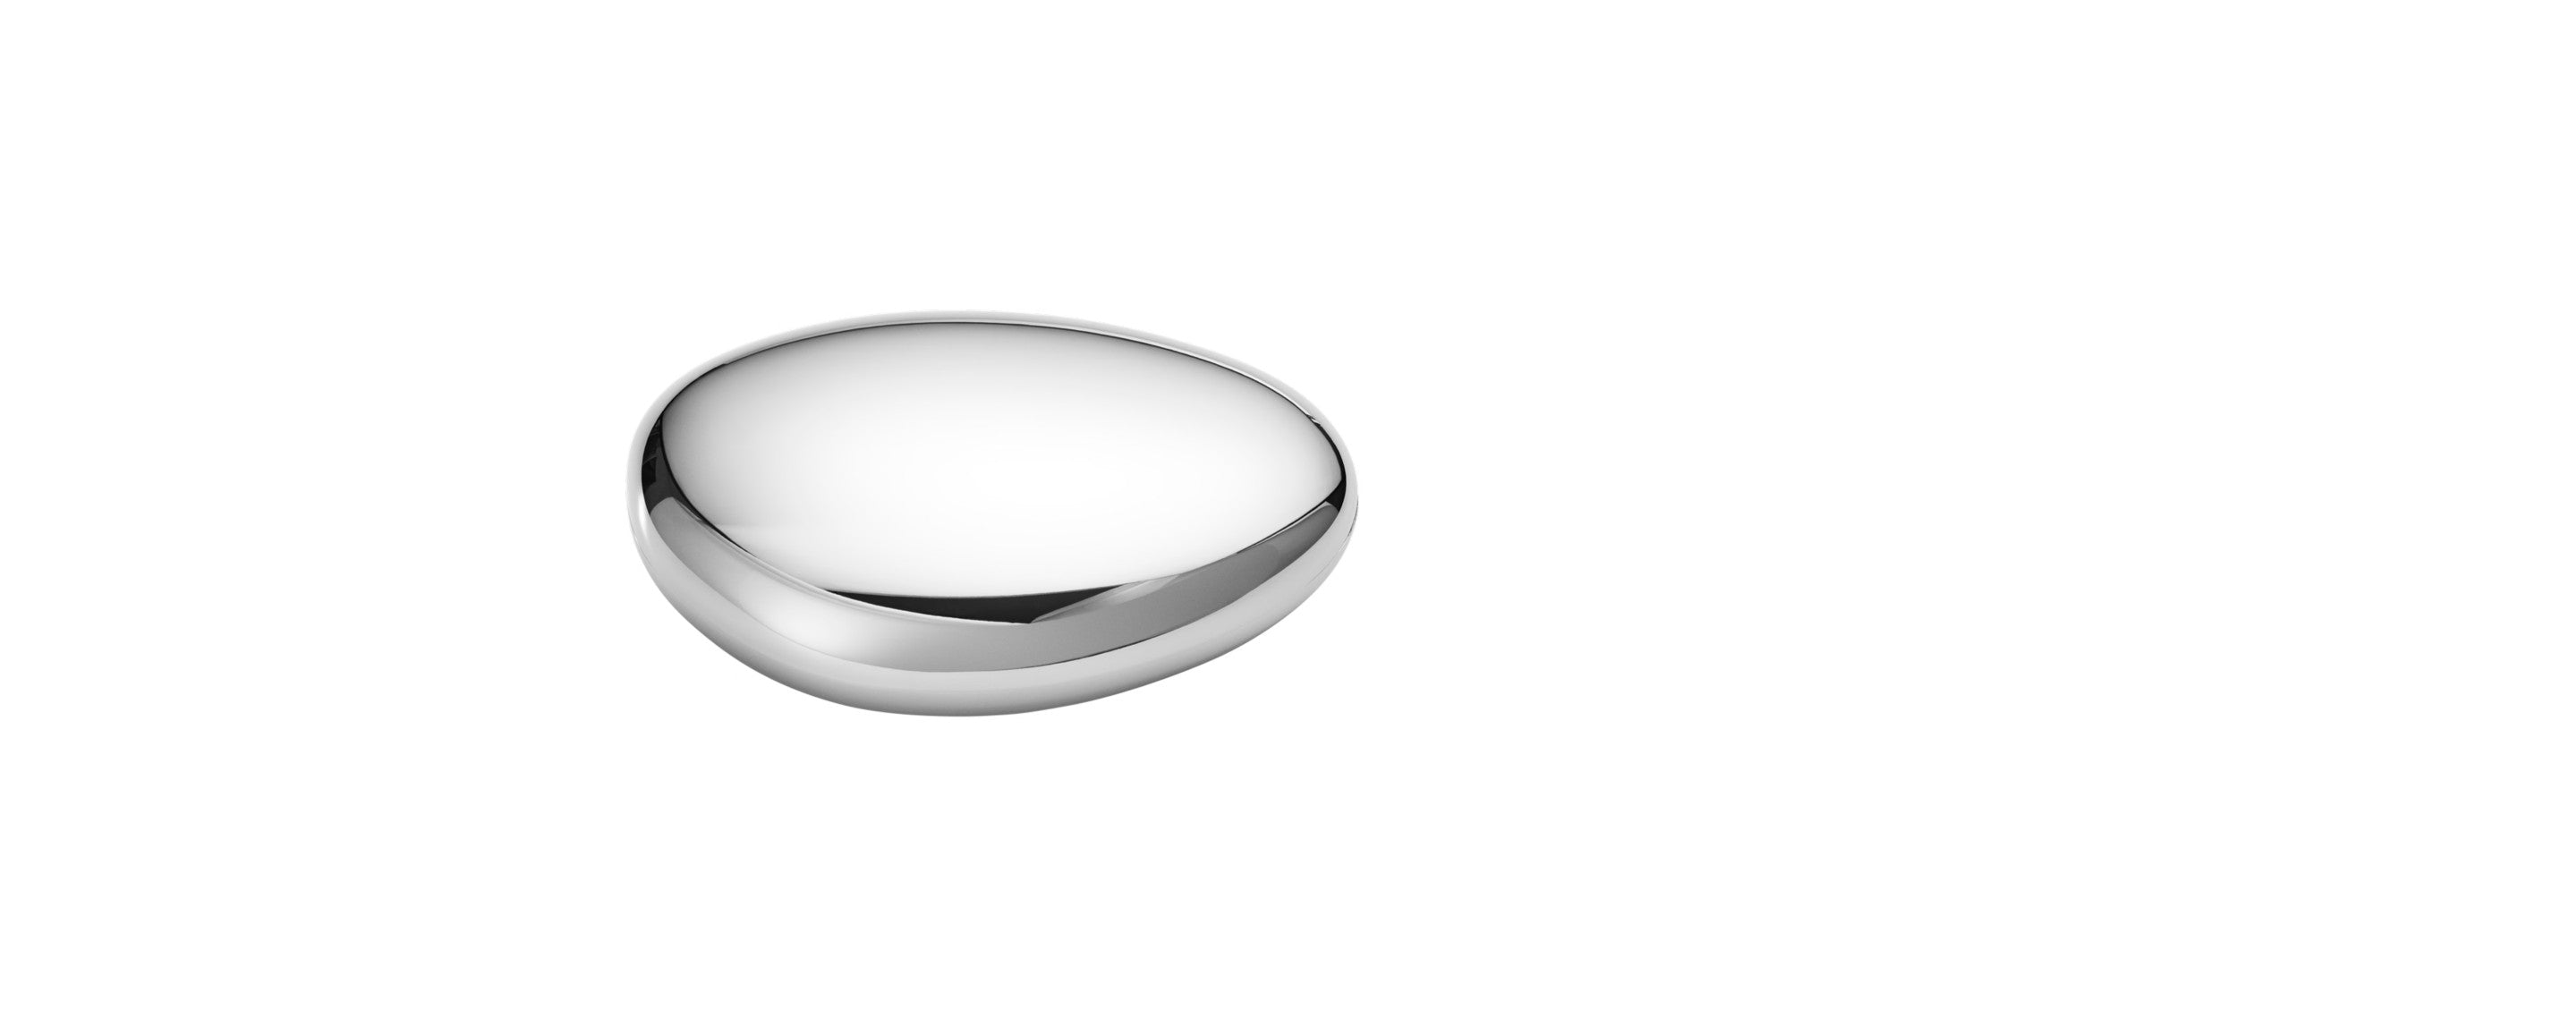 sky low and tall box by aurélien barbry for georg jensen